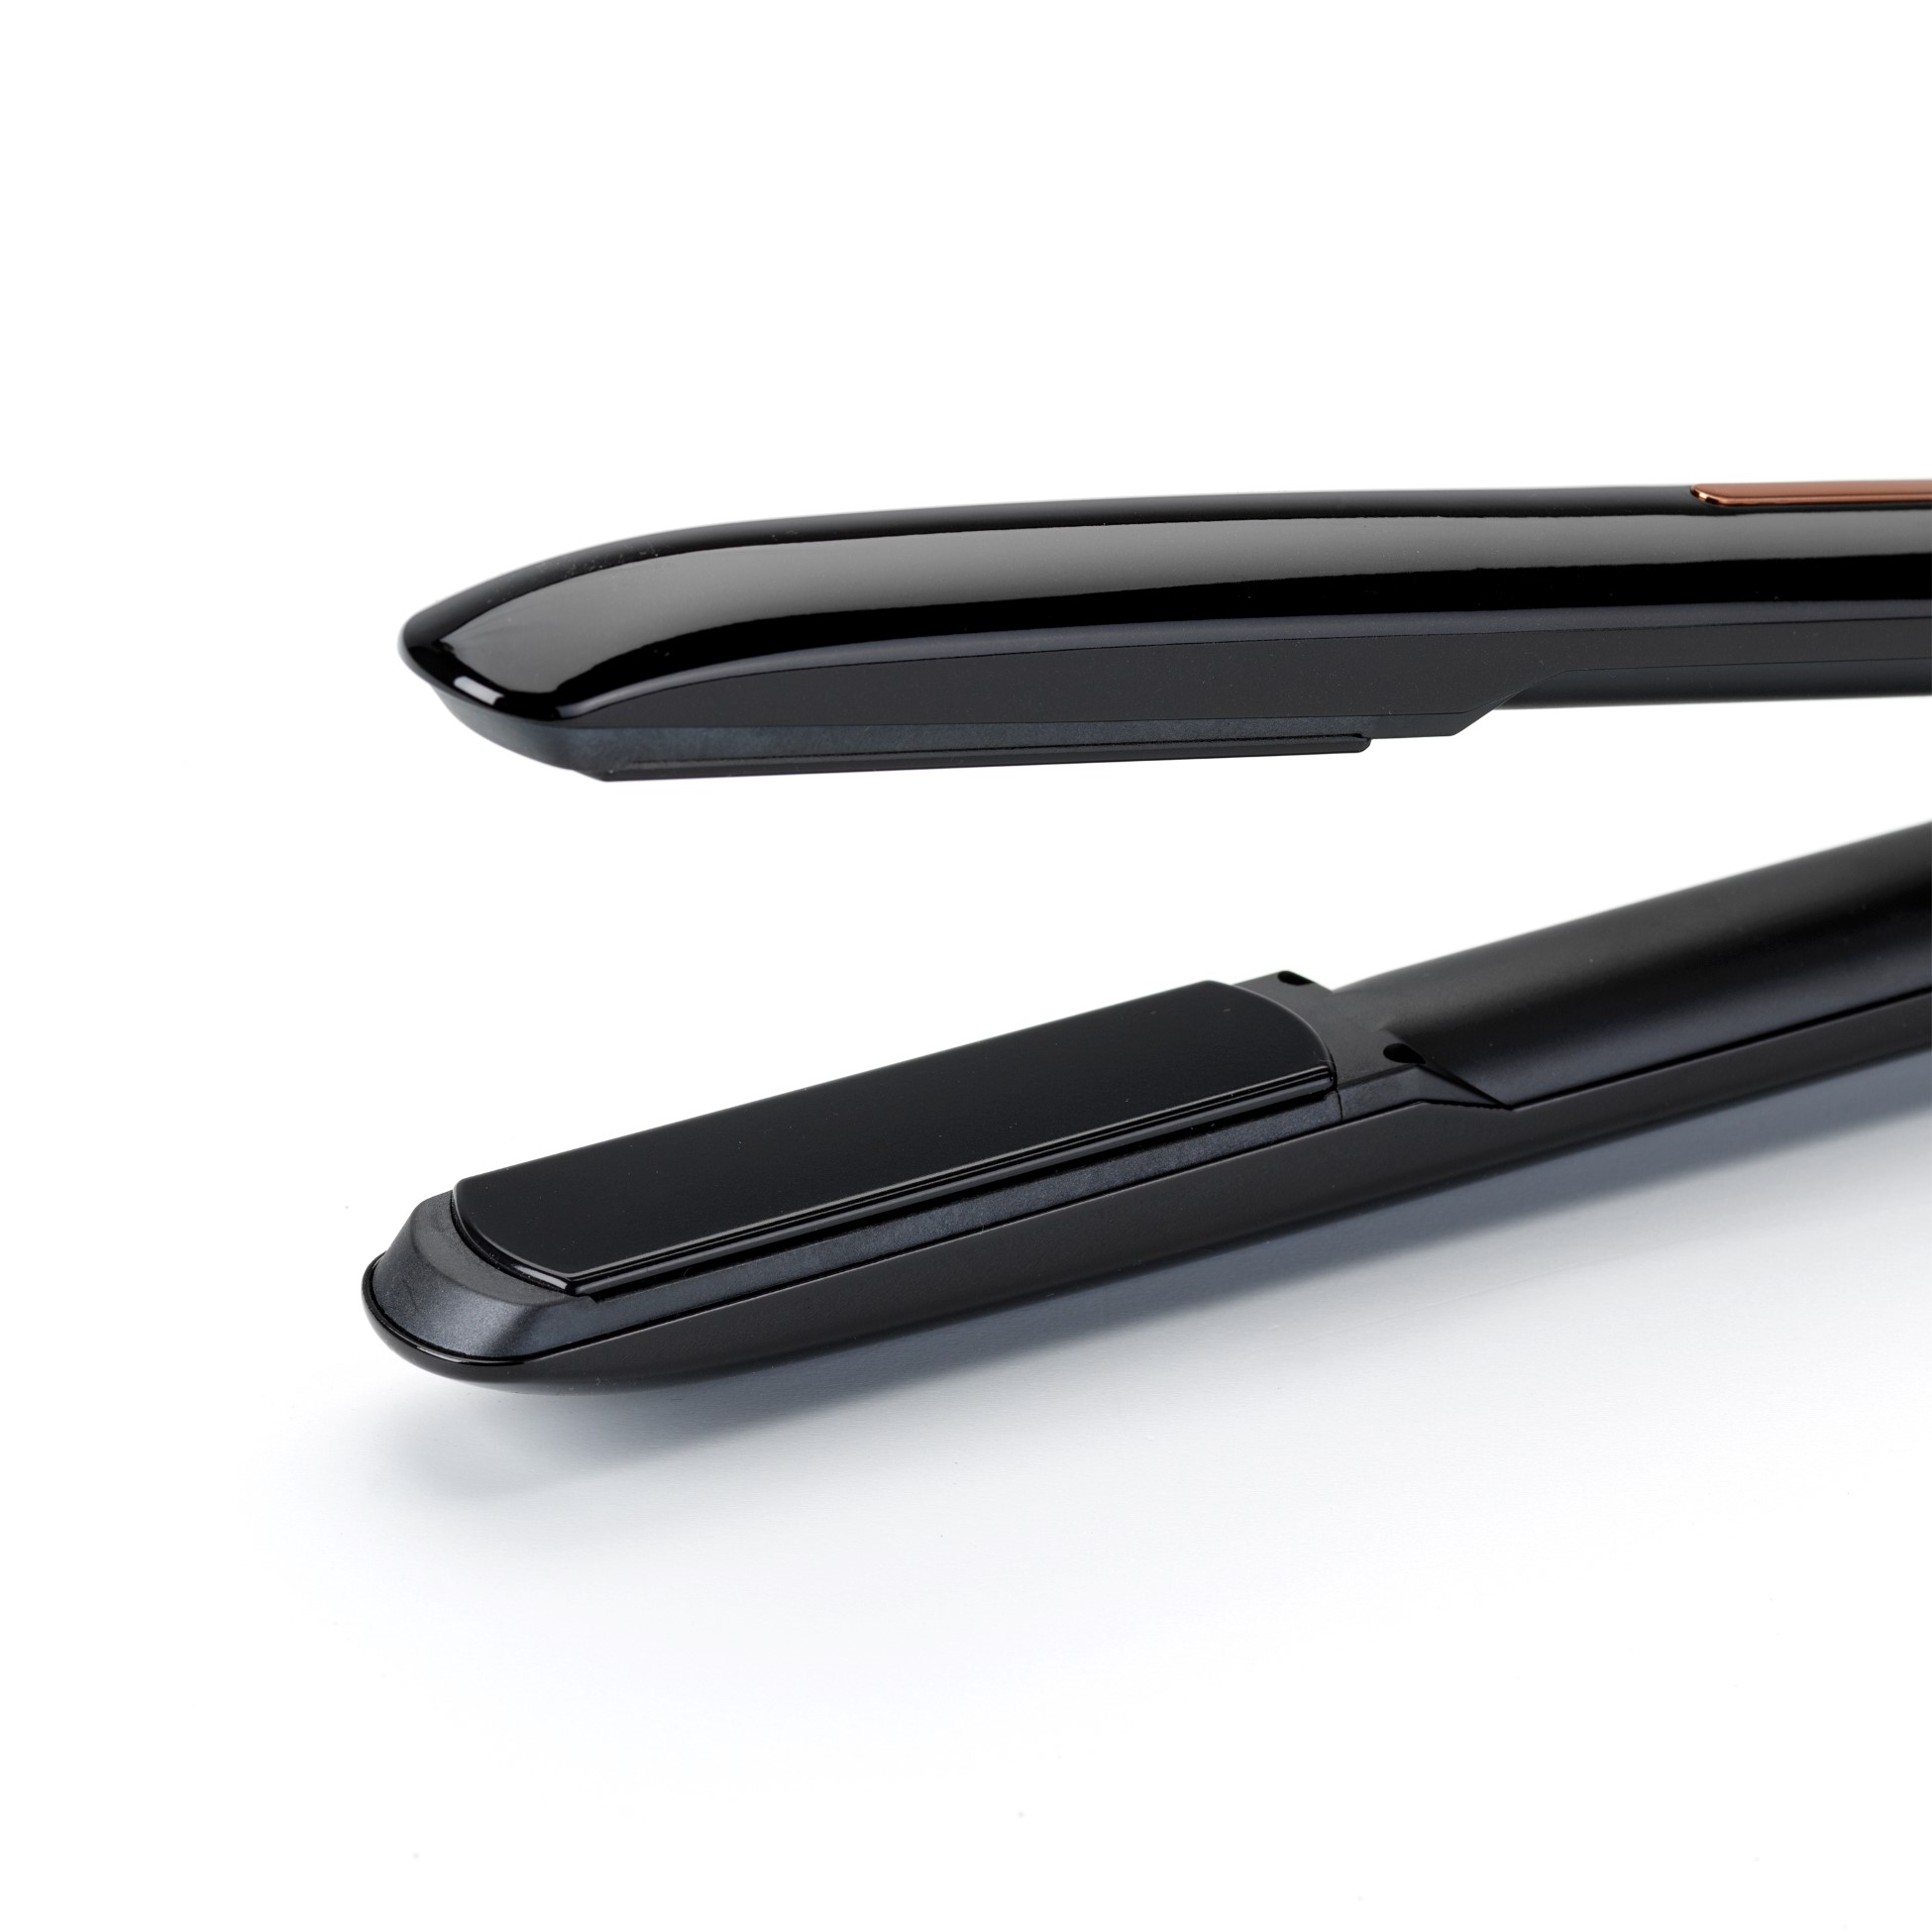 Picture of BABYLISS 9000 CORDLESS STRAIGHTENER